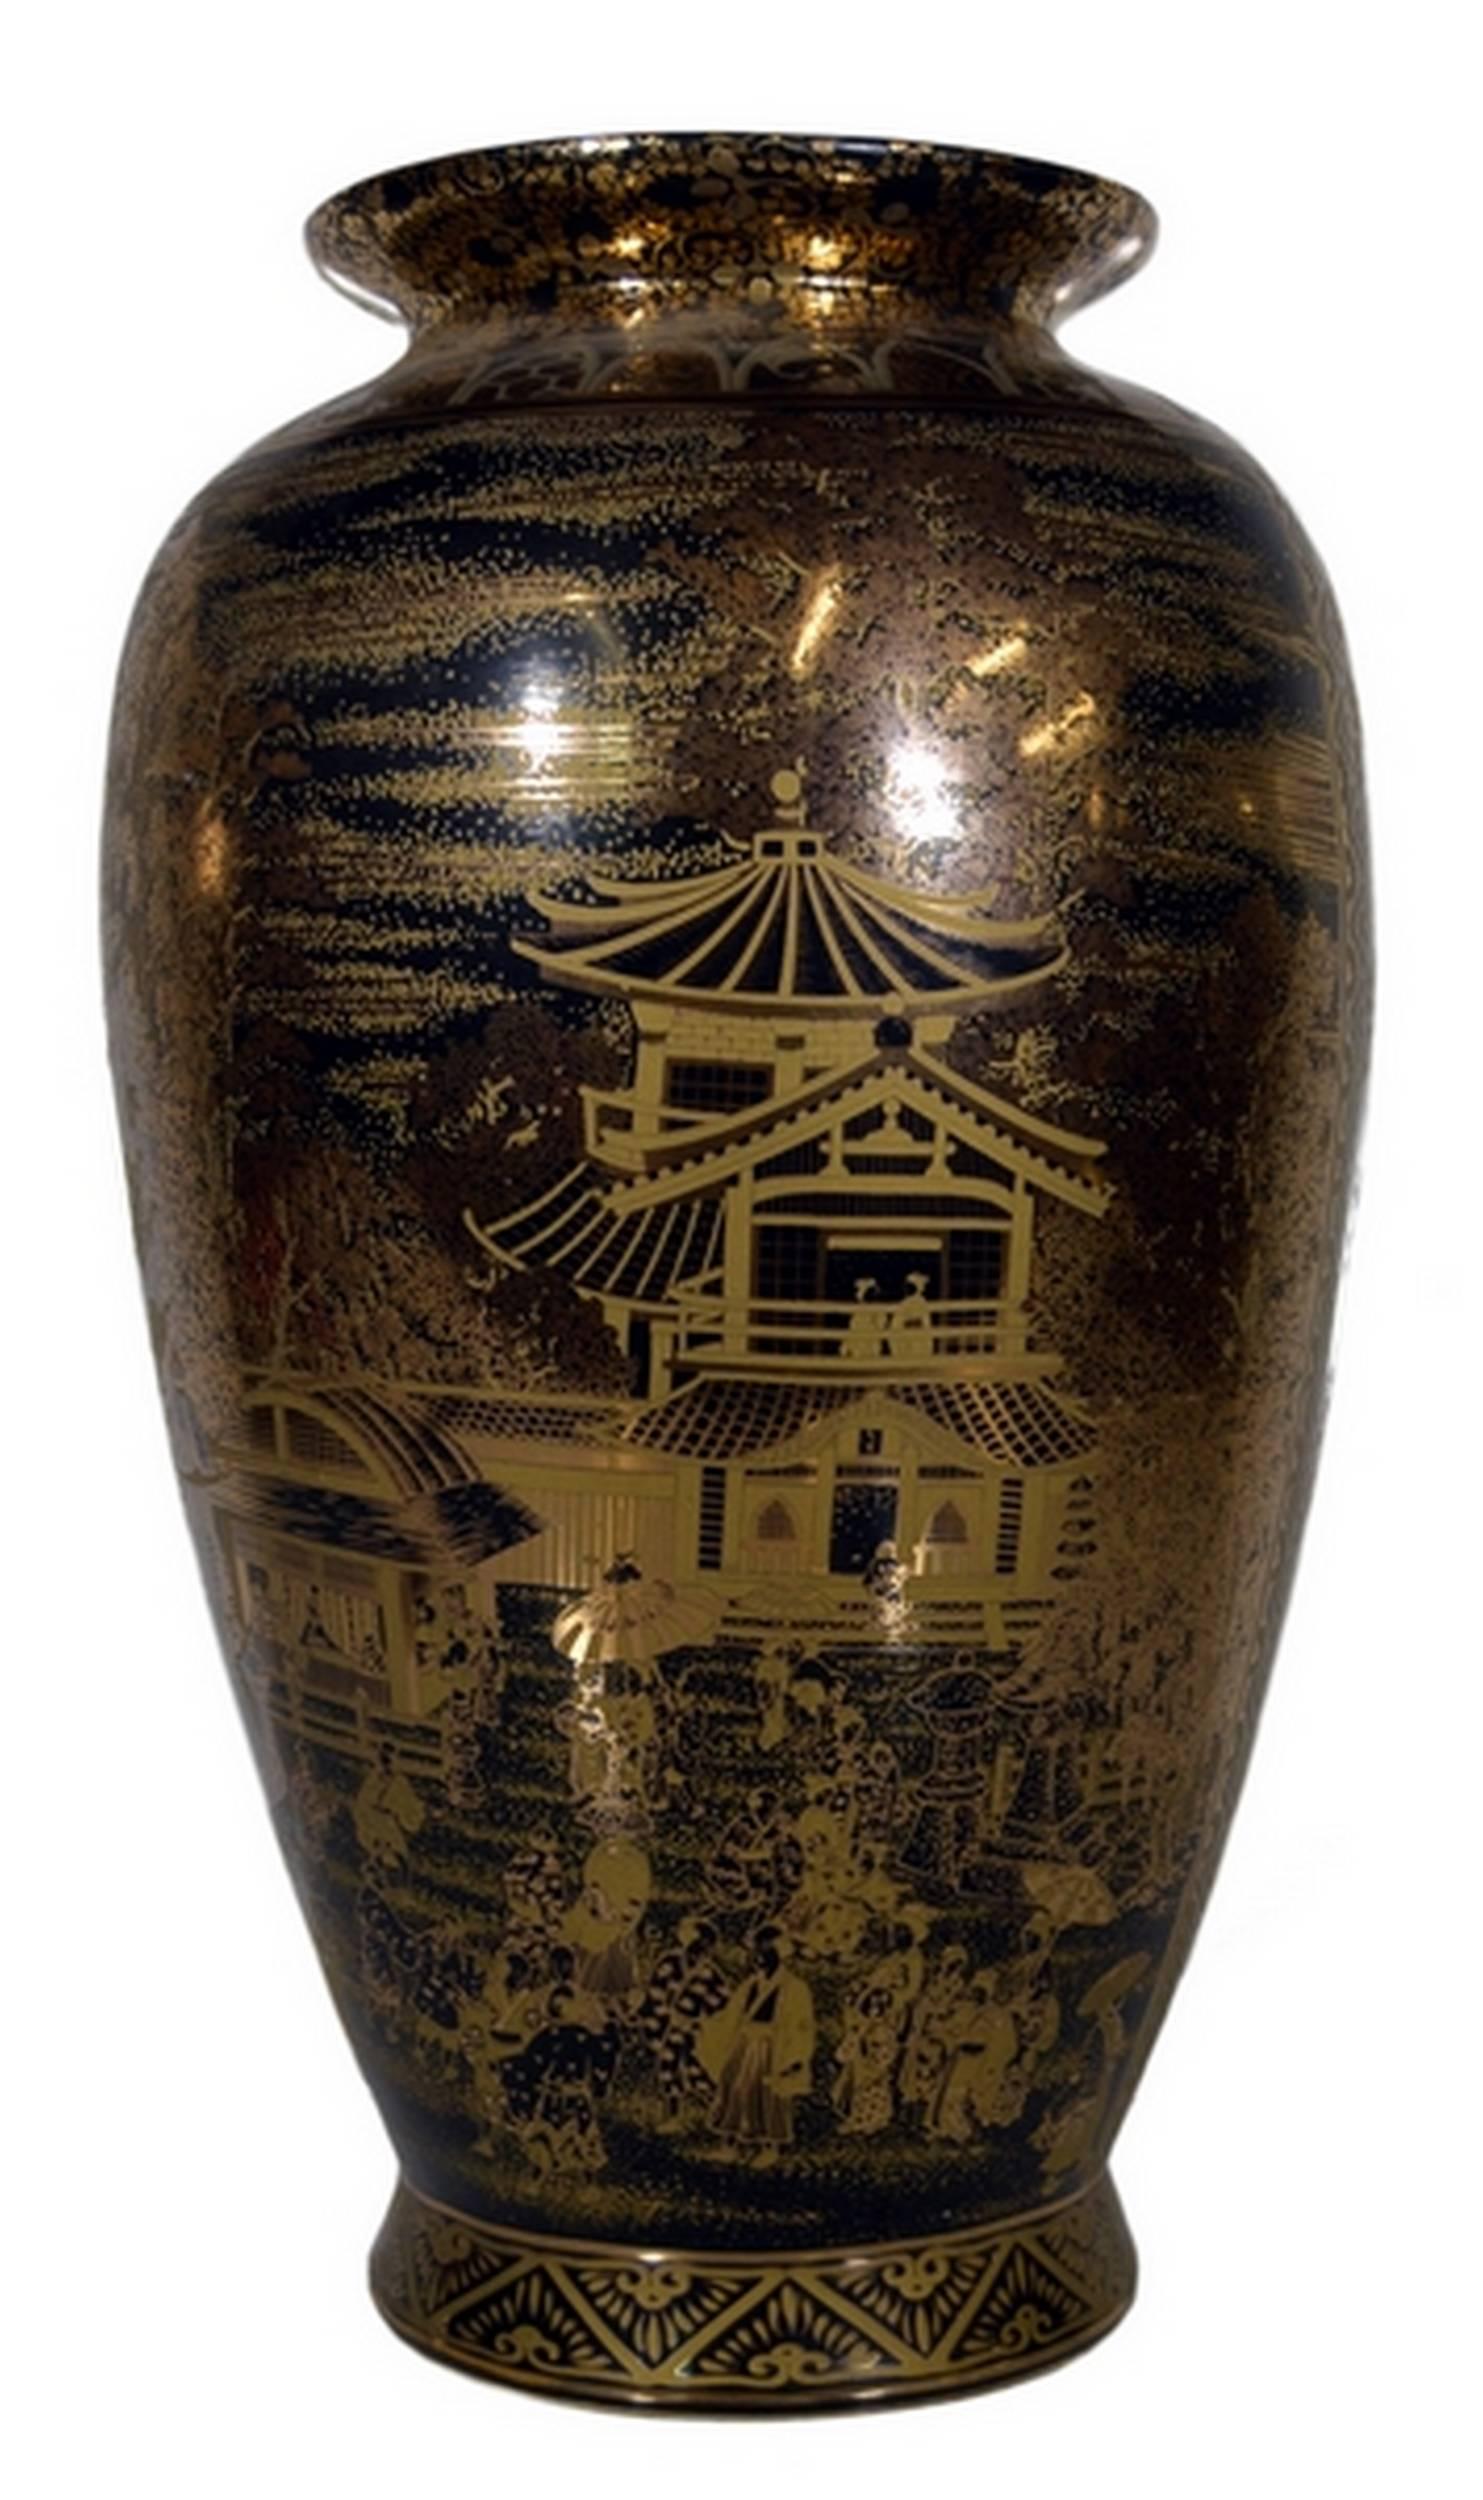 A Chinese hand-painted porcelain vase in black and gilt from the late 20th century with decorative scenes. This Chinese vase adopts a traditional shape displaying a tall oval belly with a circular base and a small flared neck. The porcelain